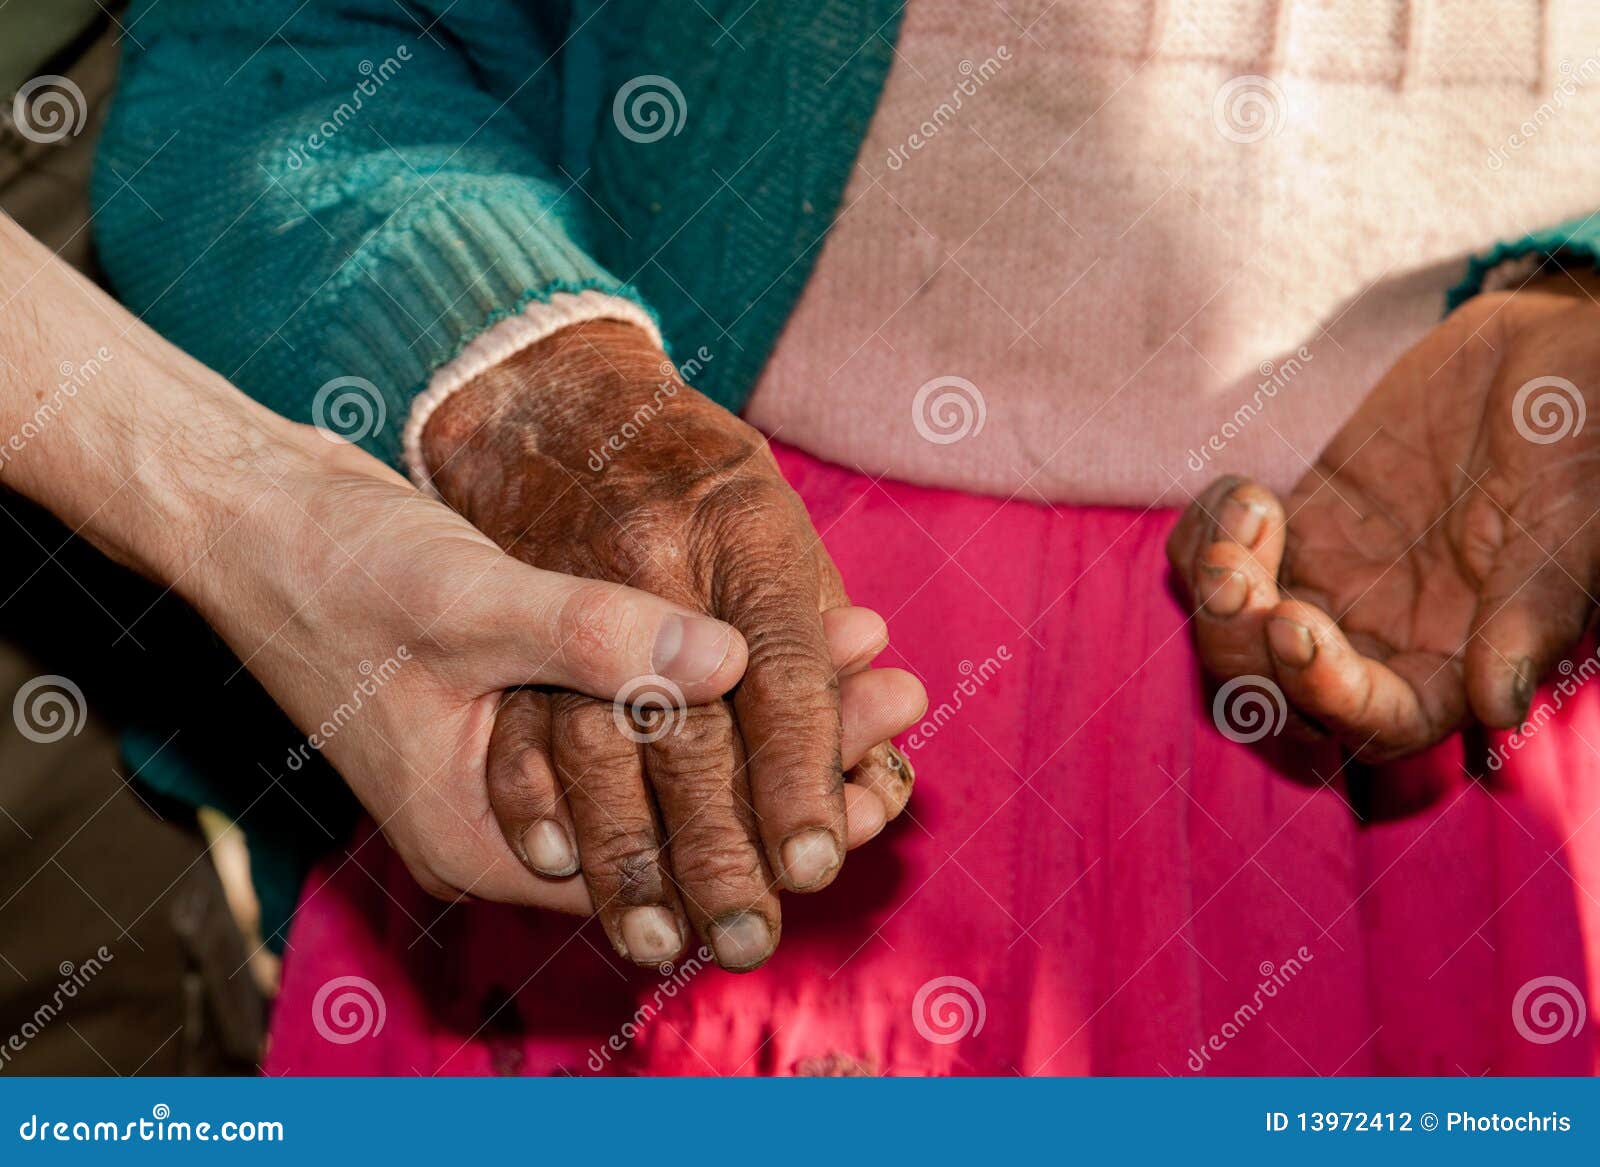 Old Woman, Young Man stock photo. Image of fingers, help - 13972412